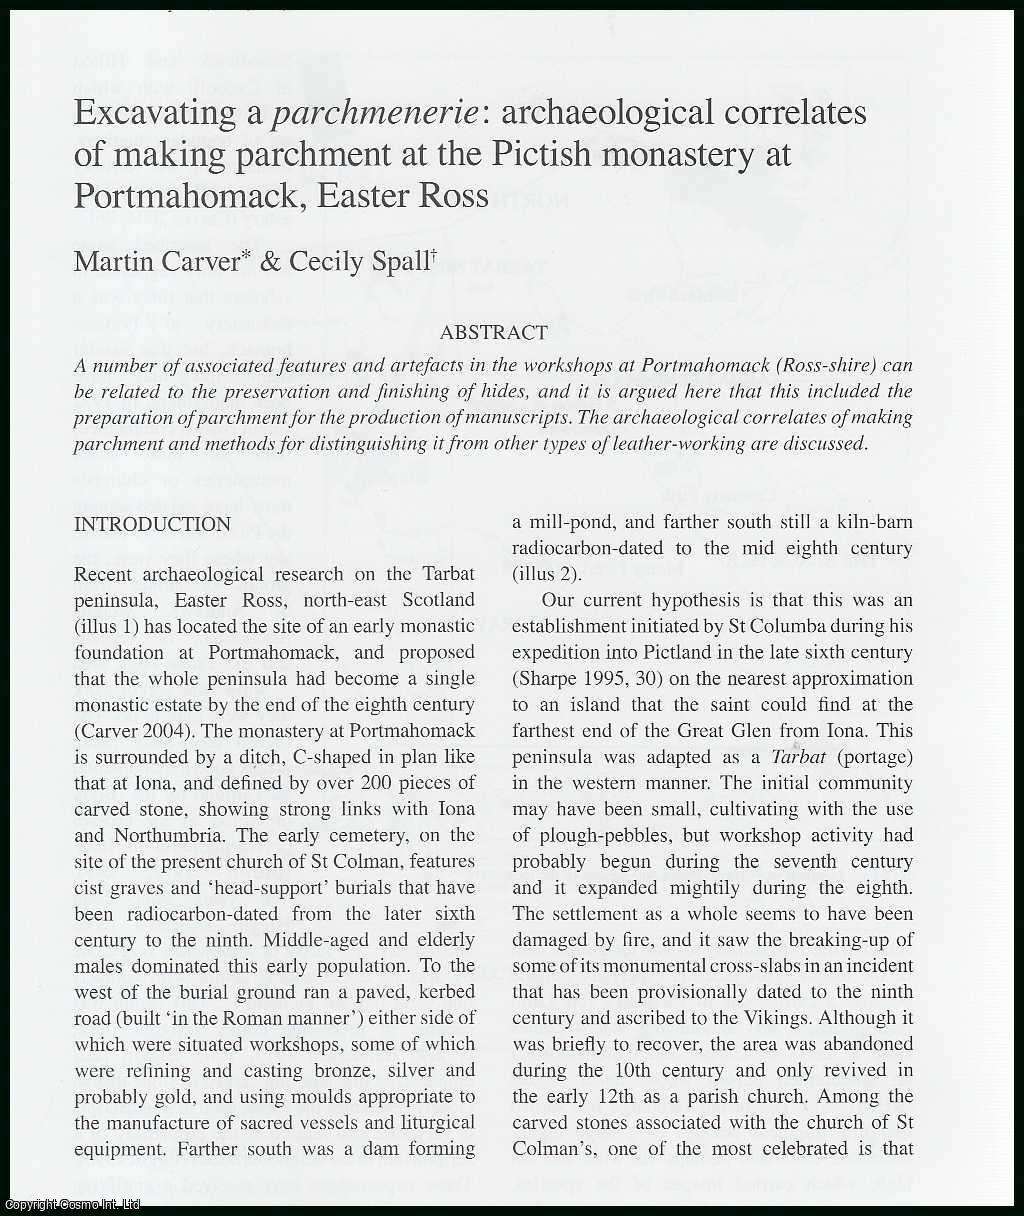 Martin Carver & Cecily Spall - Excavating a Parchmenerie: Archaeological Correlates of Making Parchment at The Pictish Monastery at Portmahomack, Easter Ross. An original article from the Proceedings of the Society of Antiquaries of Scotland, 2004.